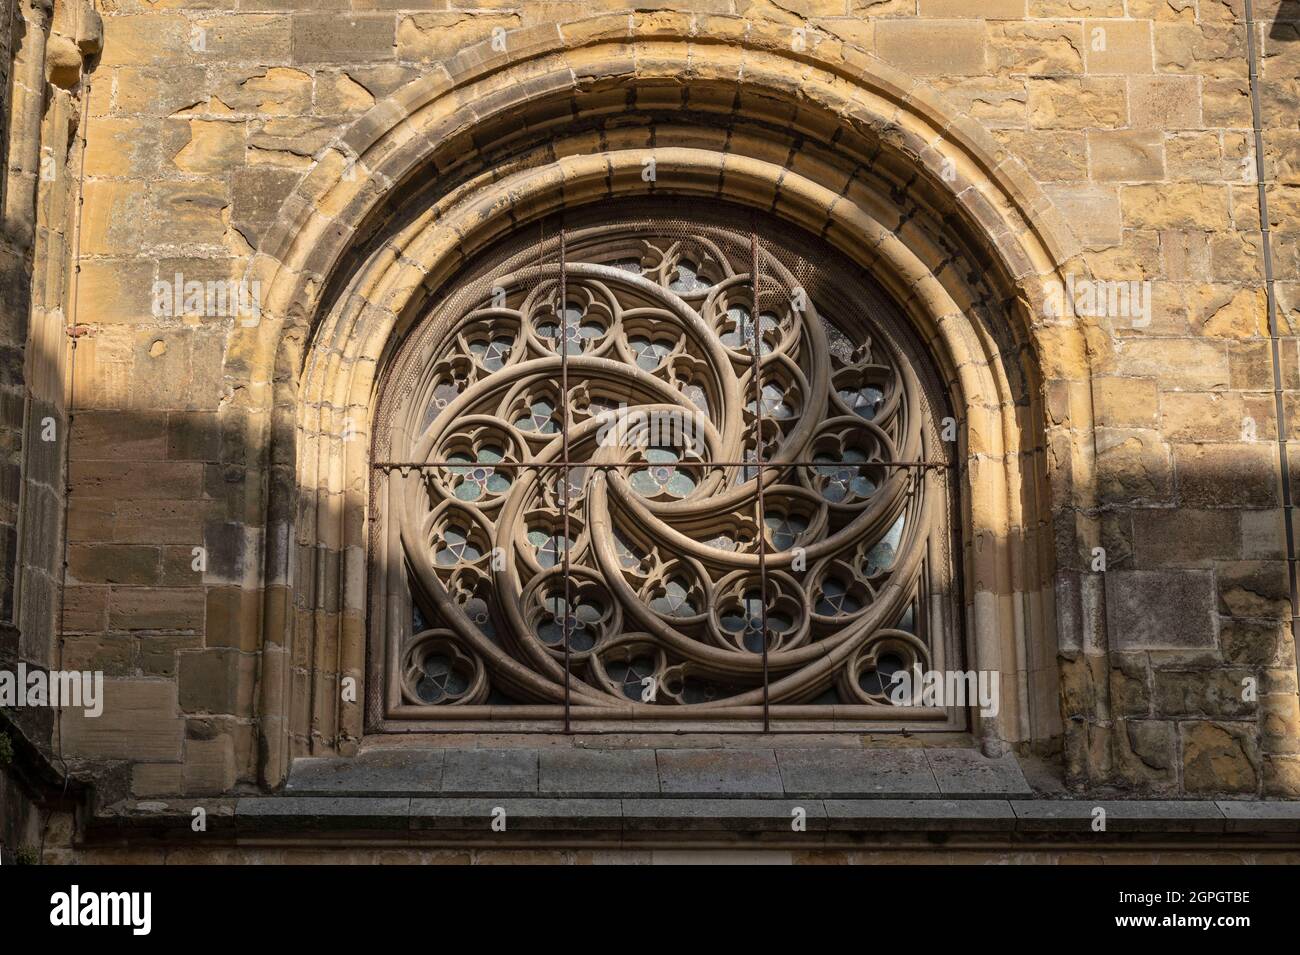 France, Pyrenees Atlantiques, Bayonne, Pays Basque, Sainte-Marie cathedral, stained glass window seen from the outside Stock Photo